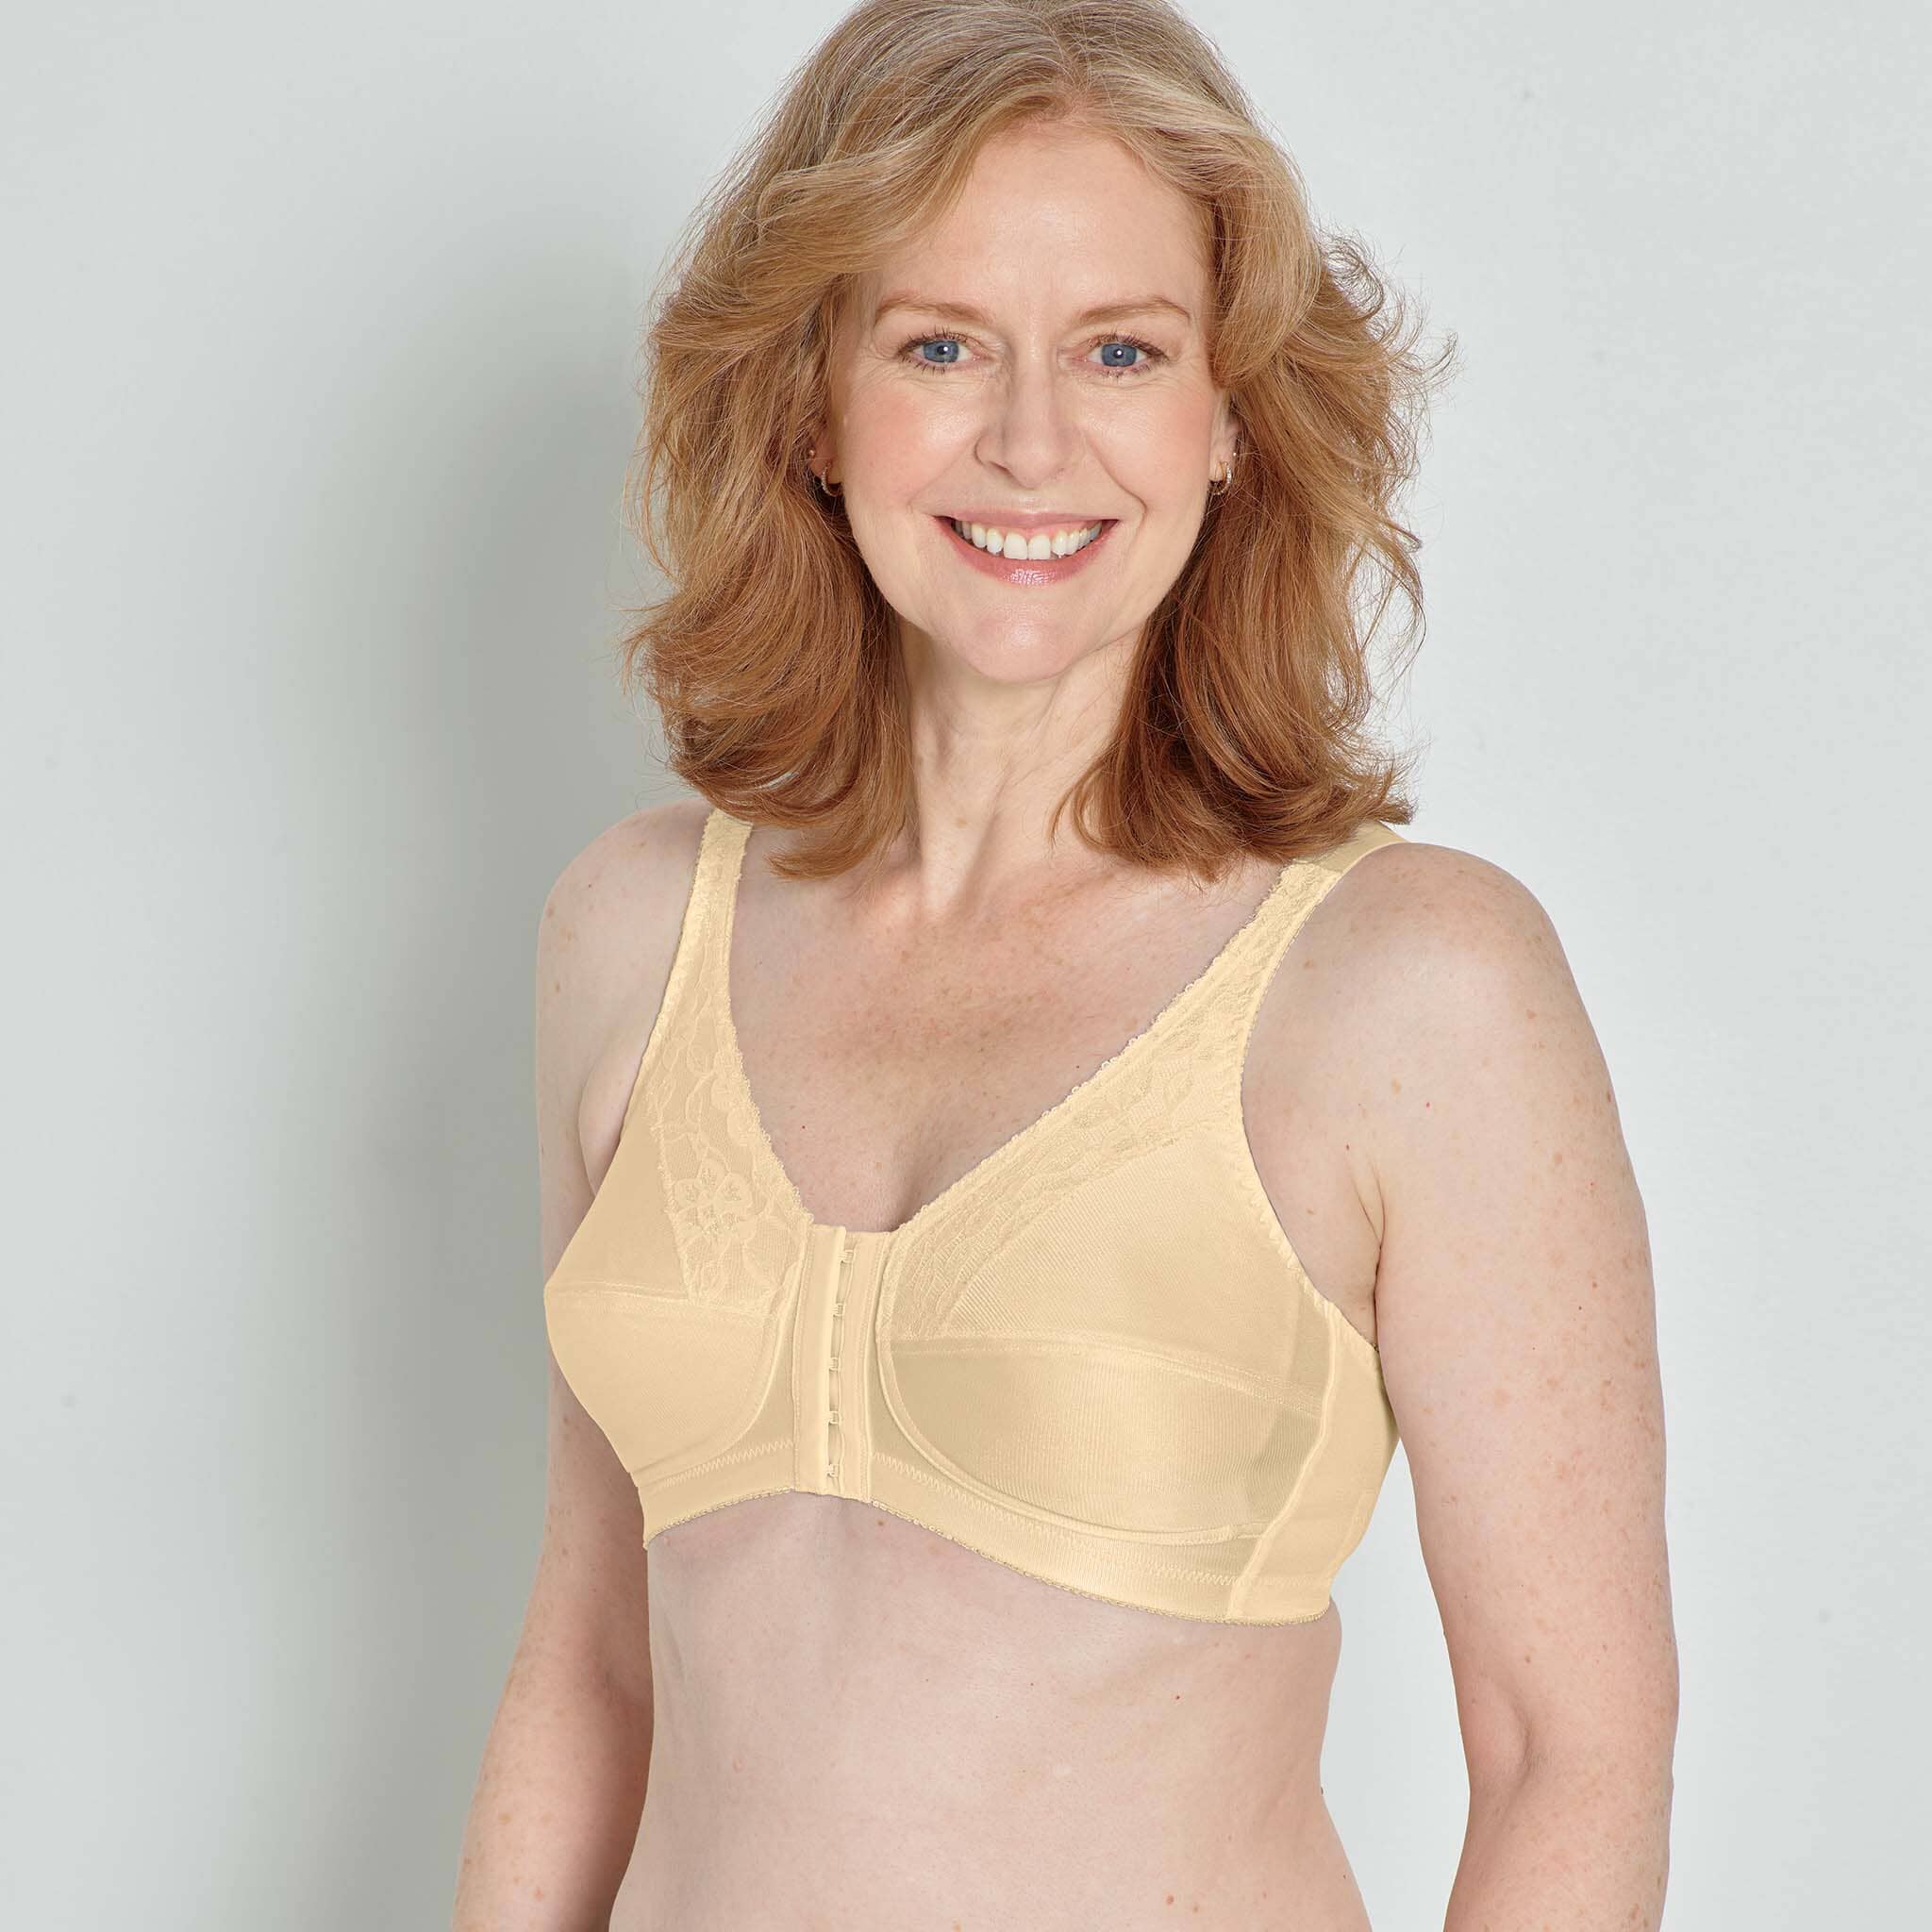 Buy Mastectomy Bras with Built-in Forms